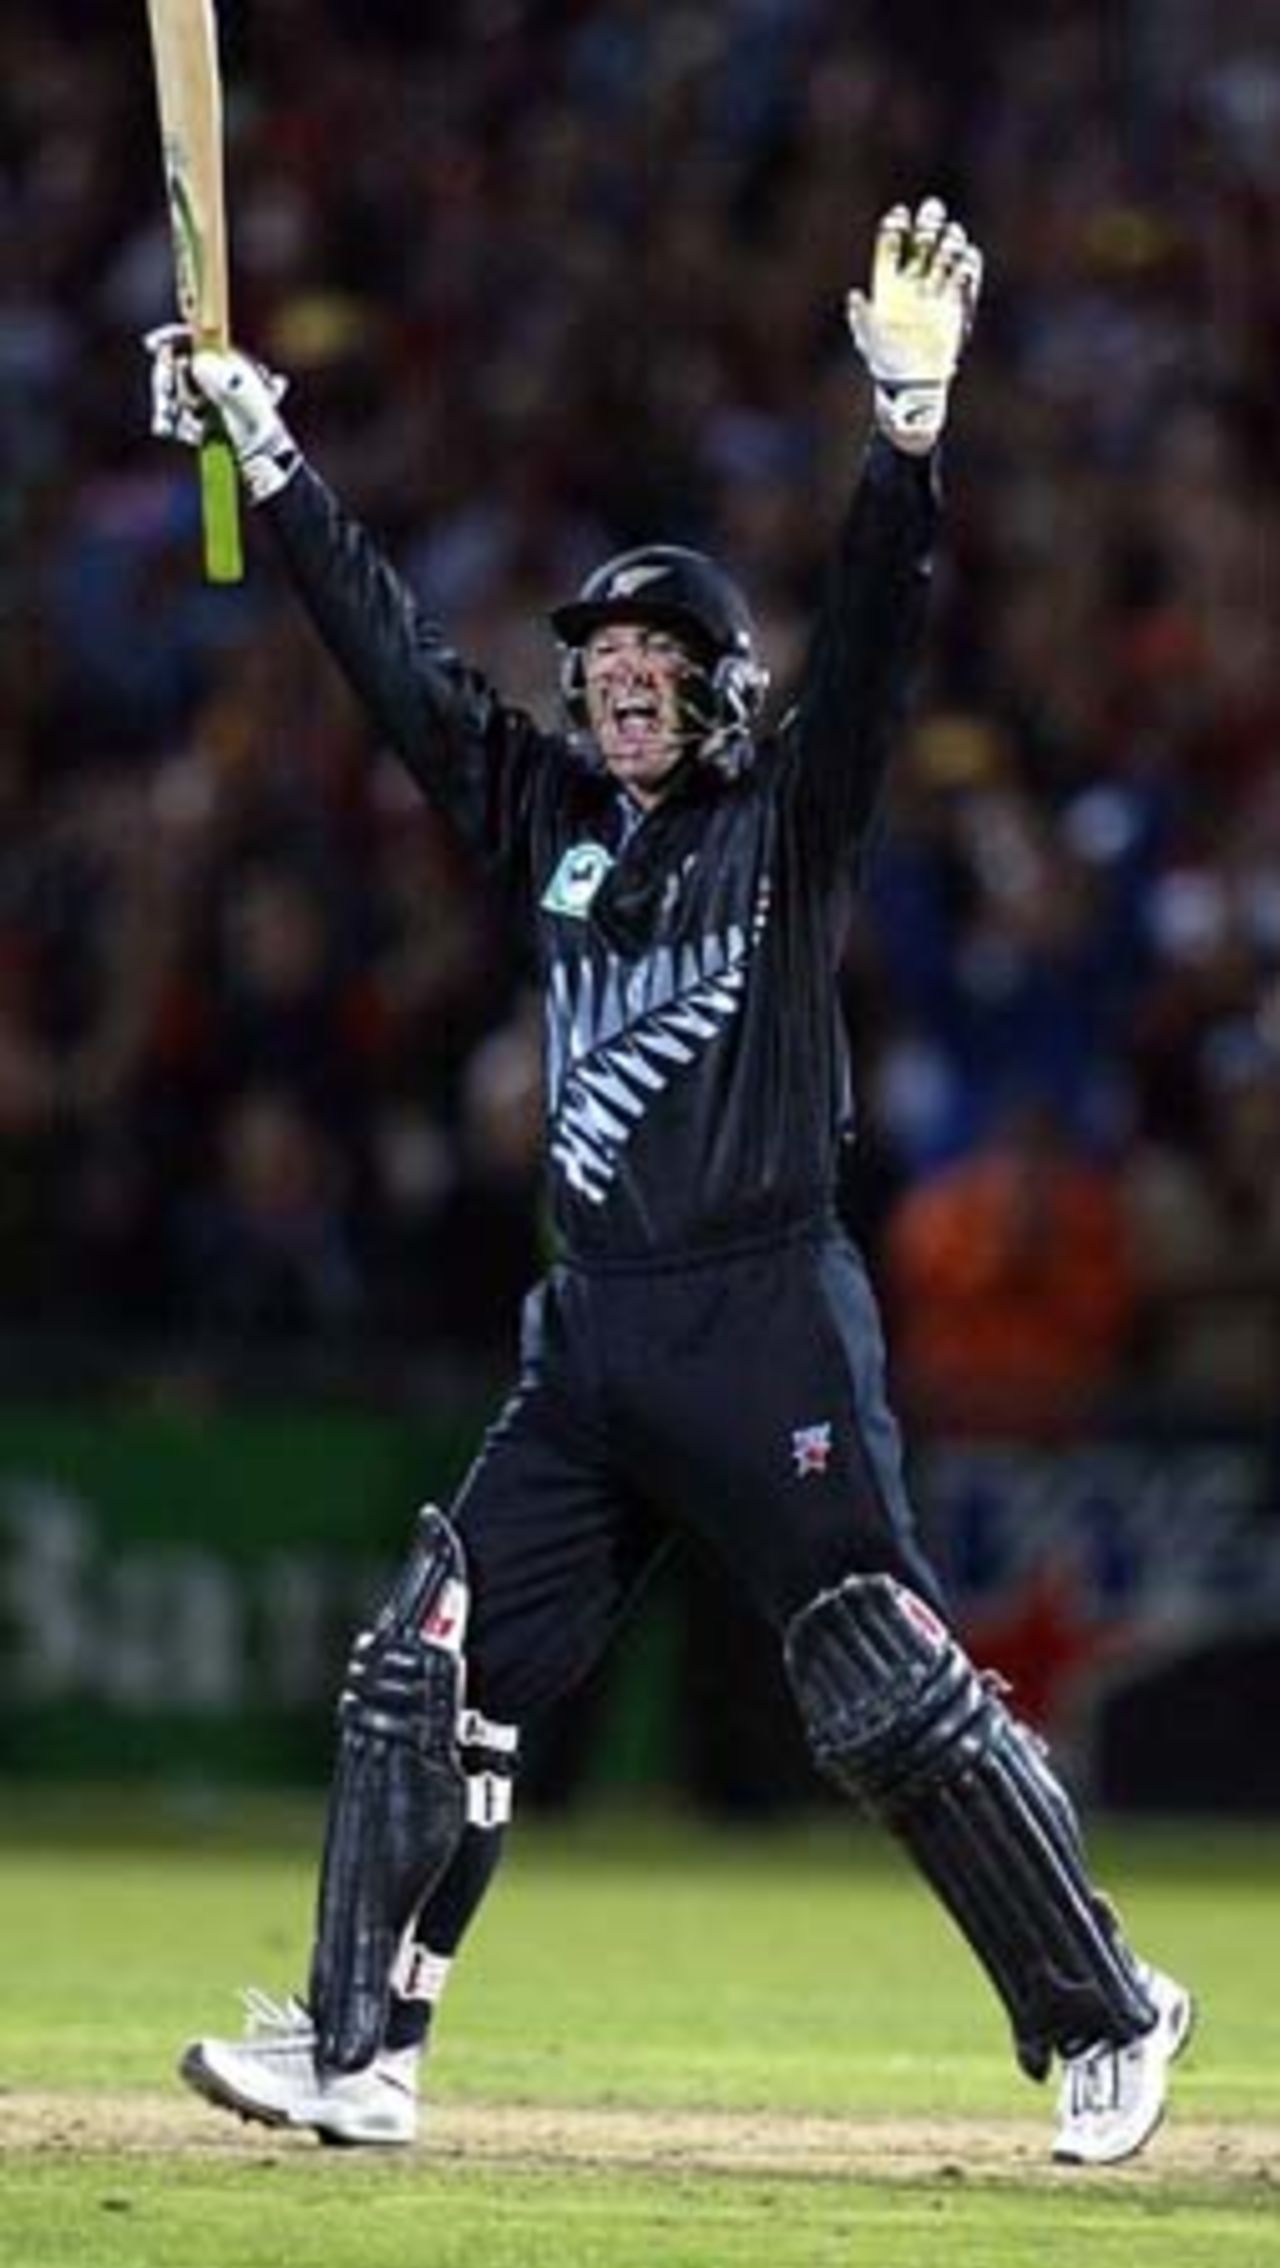 New Zealand batsman Nathan Astle celebrates hitting the winning runs, a six from the bowling of England bowler Andrew Flintoff to win the match by five wickets and the five match series 3-2. Astle scored 122 not out. 5th ODI: New Zealand v England at Carisbrook, Dunedin, 26 February 2002.